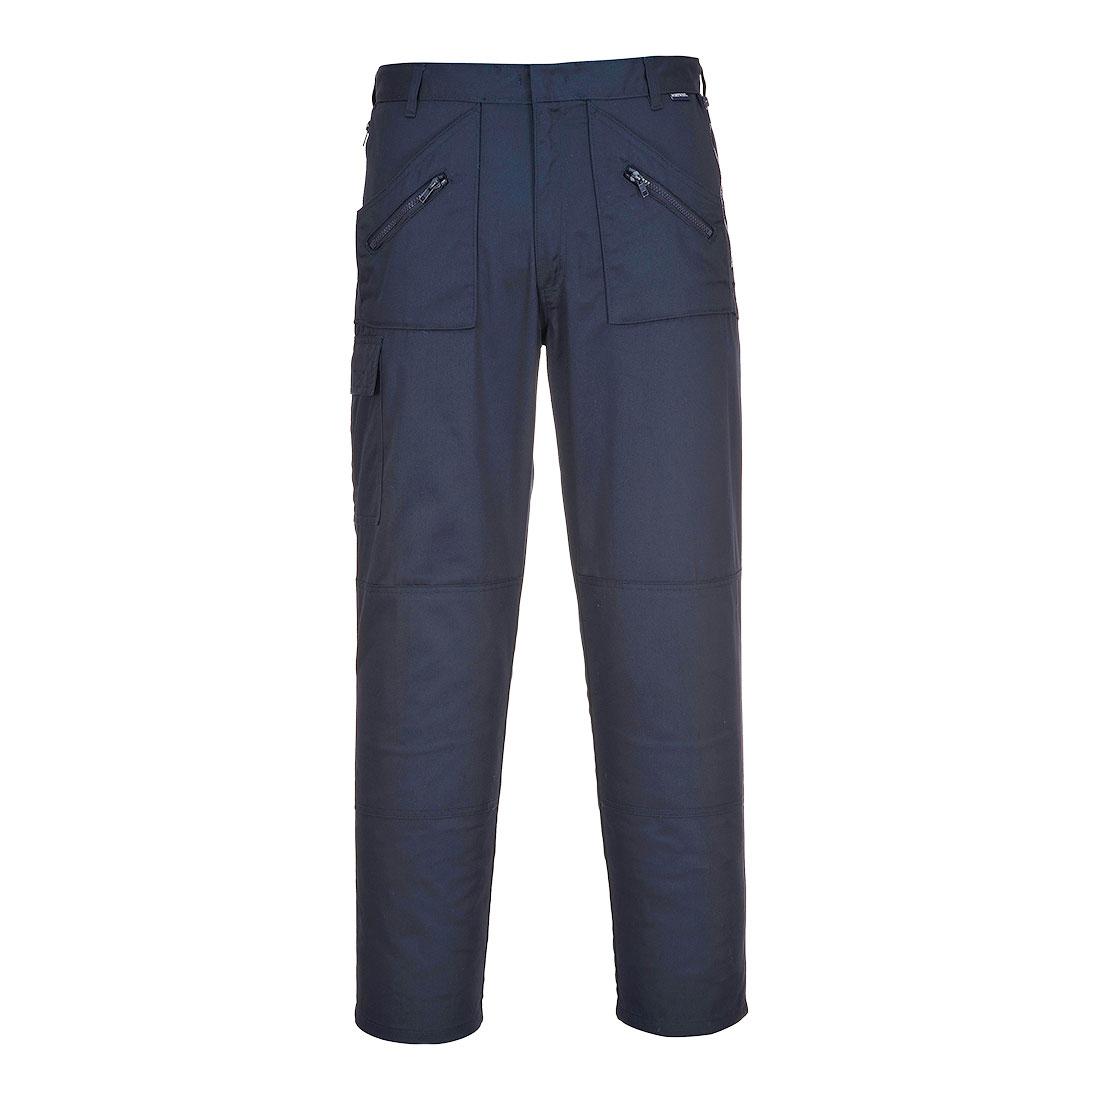 Trouser Navy – 33 – Work Safety Protective Equipment – Portwest – Regus Supply